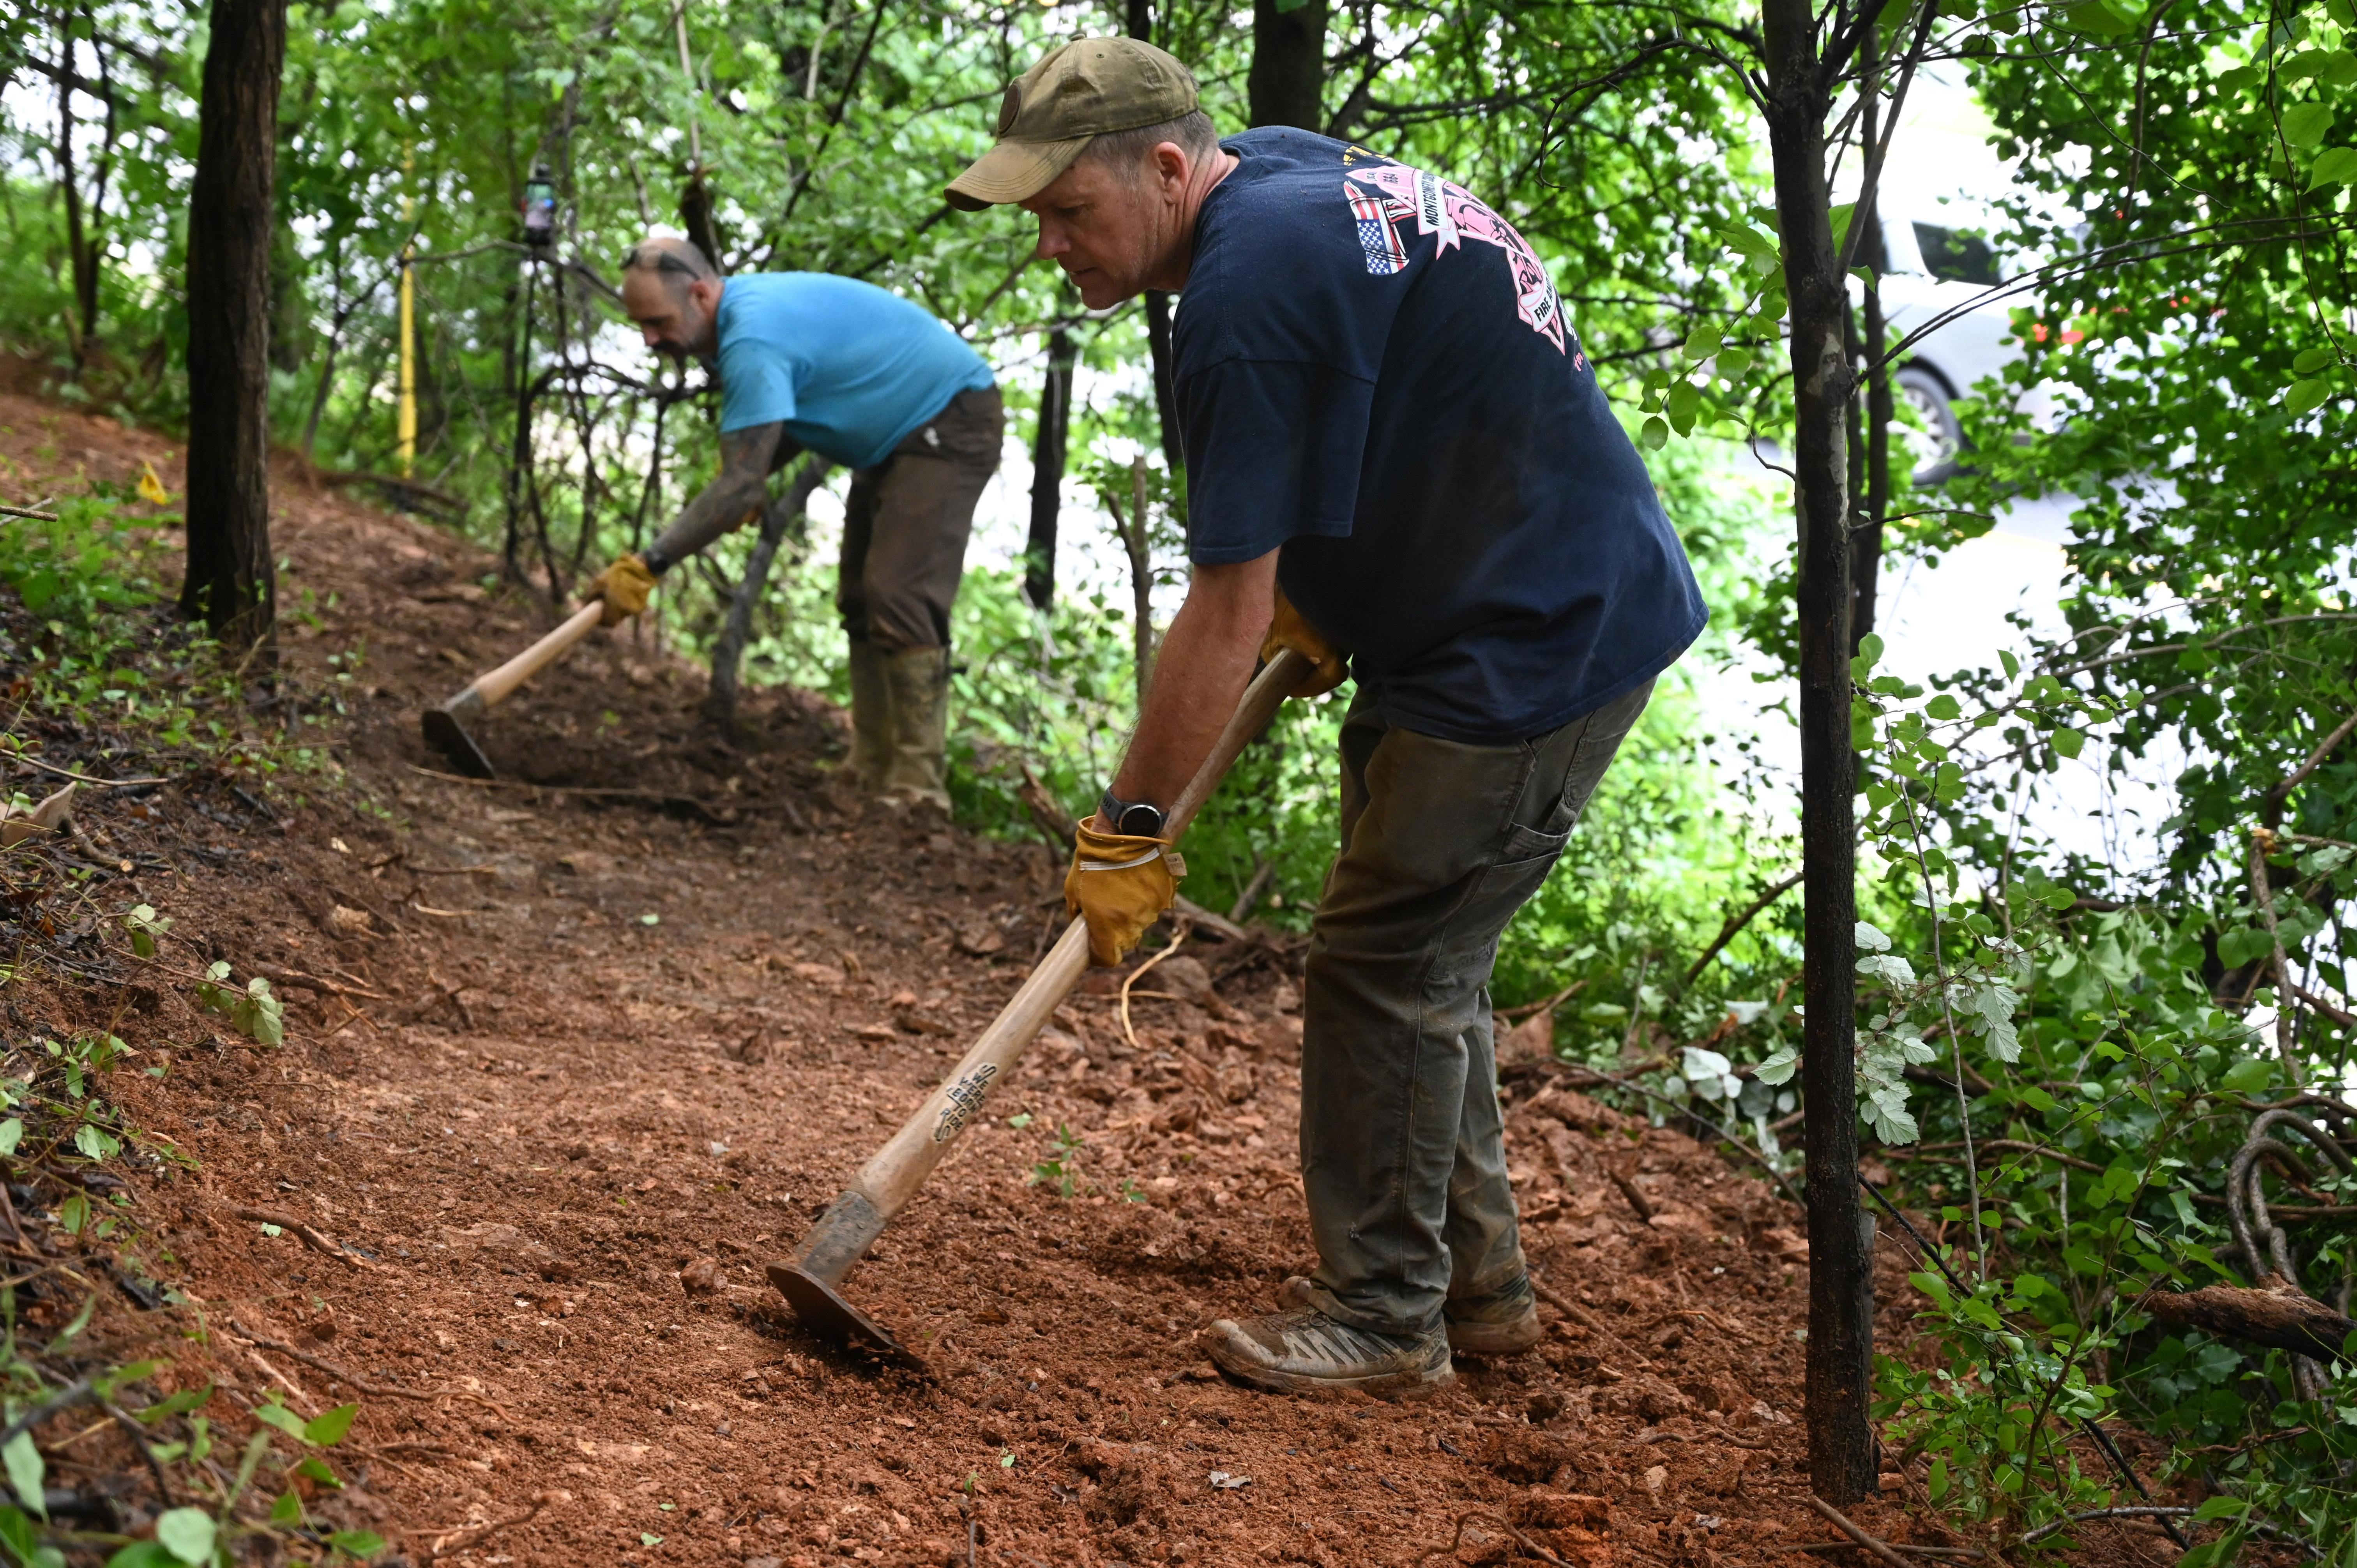 Patrick Ellis, trail liaison, is joined by Dan Clark, left, and other volunteers as they make progress in the creation of a new bike trail, Windy Ridge Trails, at Mount Airy's East West Park on Saturday. (Brian Krista/staff photo)